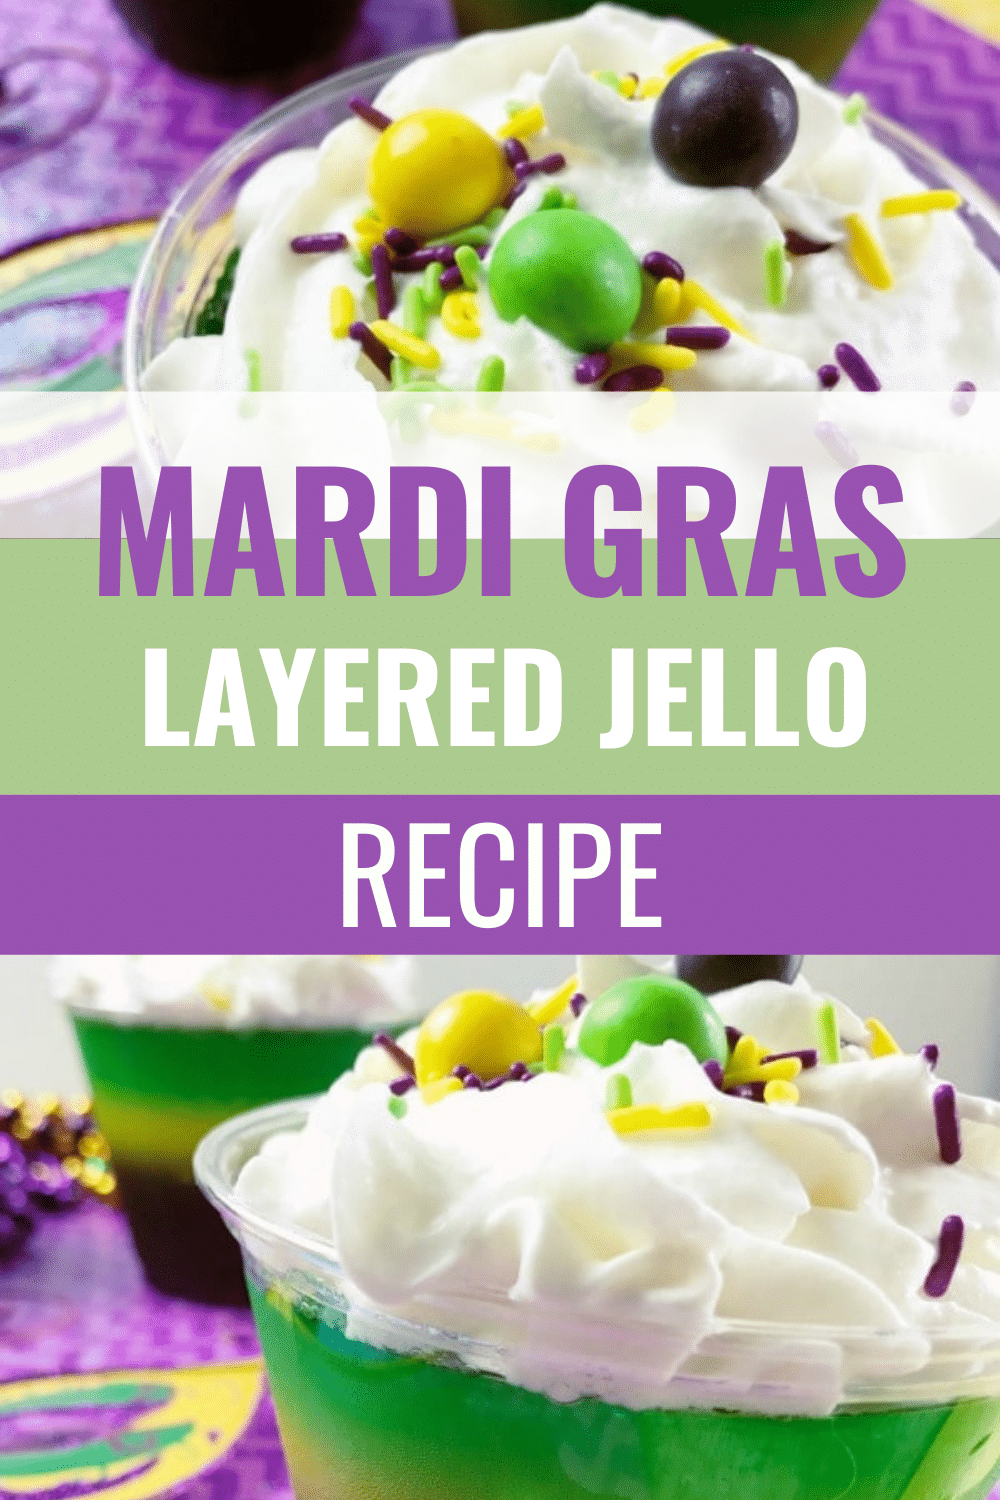 This Layered Jello for Mardi Gras is the perfect individual treat for Fat Tuesday. They're colorful, easy to make and great for parties. #mardigras #fattuesday #jello #layeredjello via @wondermomwannab